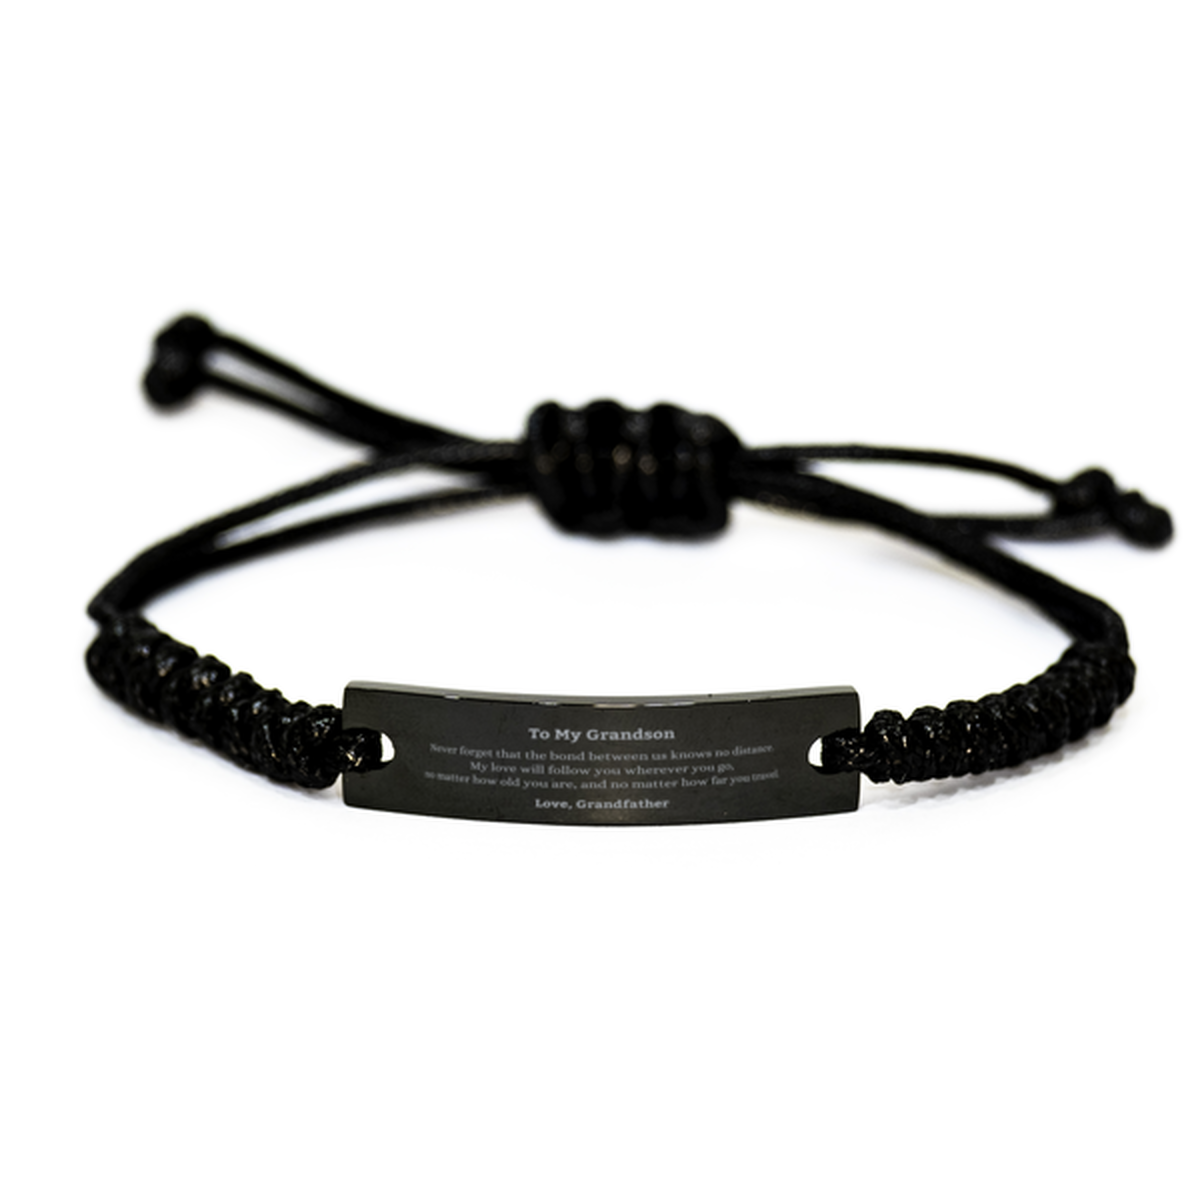 Grandson Birthday Gifts from Grandfather, Adjustable Black Rope Bracelet for Grandson Christmas Graduation Unique Gifts Grandson Never forget that the bond between us knows no distance. Love, Grandfather